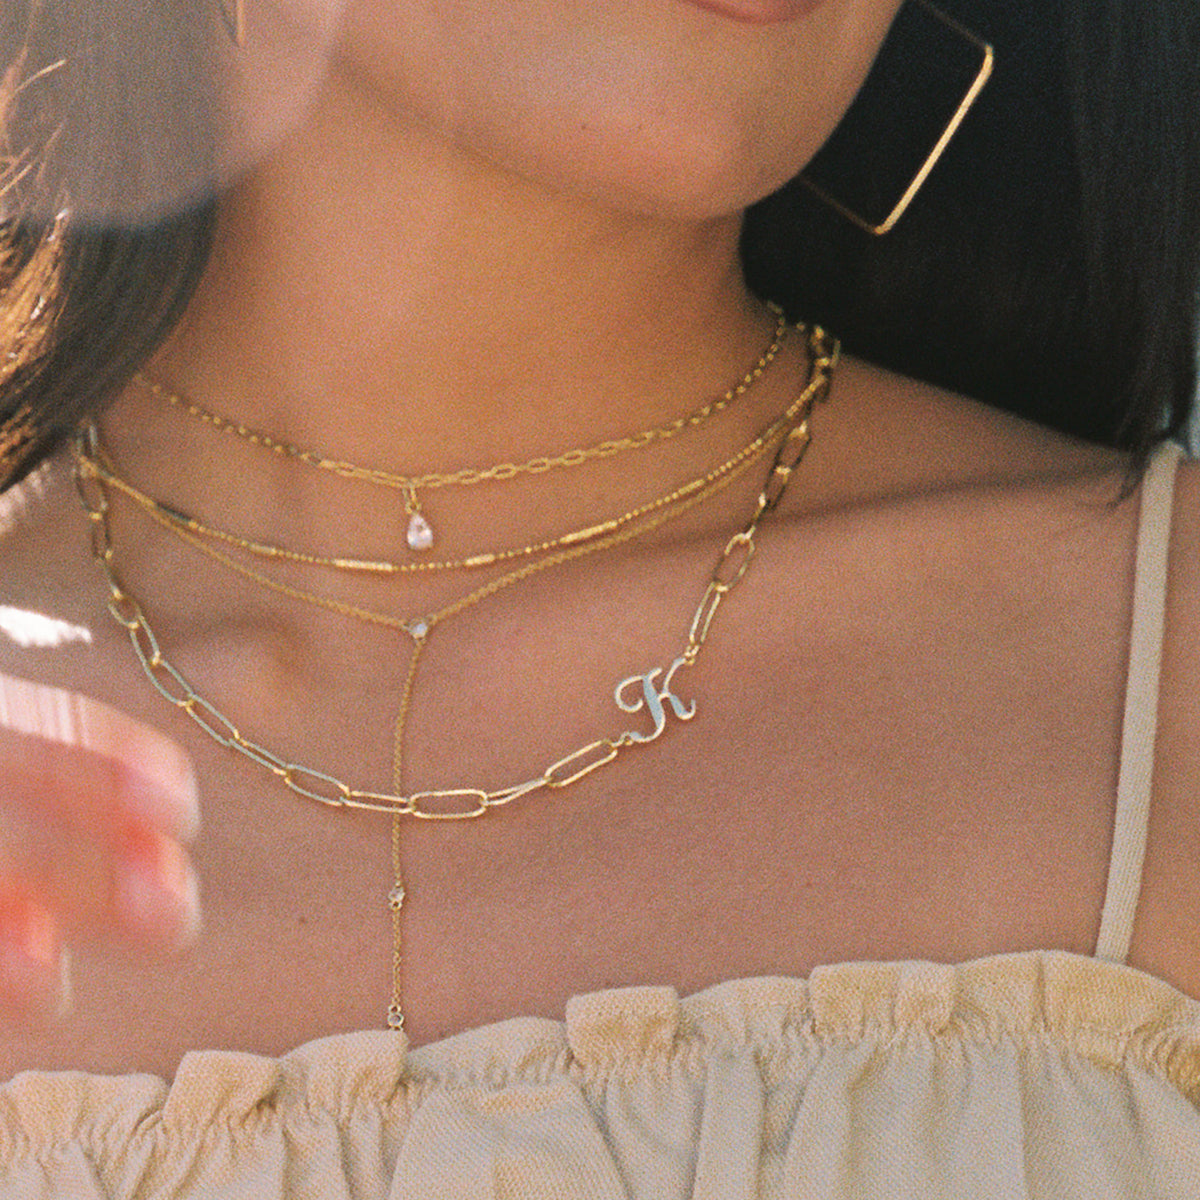 Cursive Initial Necklace | Gold A Gold B Gold C Gold D Gold E Gold F Gold G Gold H Gold I Gold J Gold K Gold L Gold M Gold N Gold O Gold P Gold Q Gold R Gold S Gold T Gold U Gold V Gold W Gold X Gold Y Gold Z | Model Image | Uncommon James